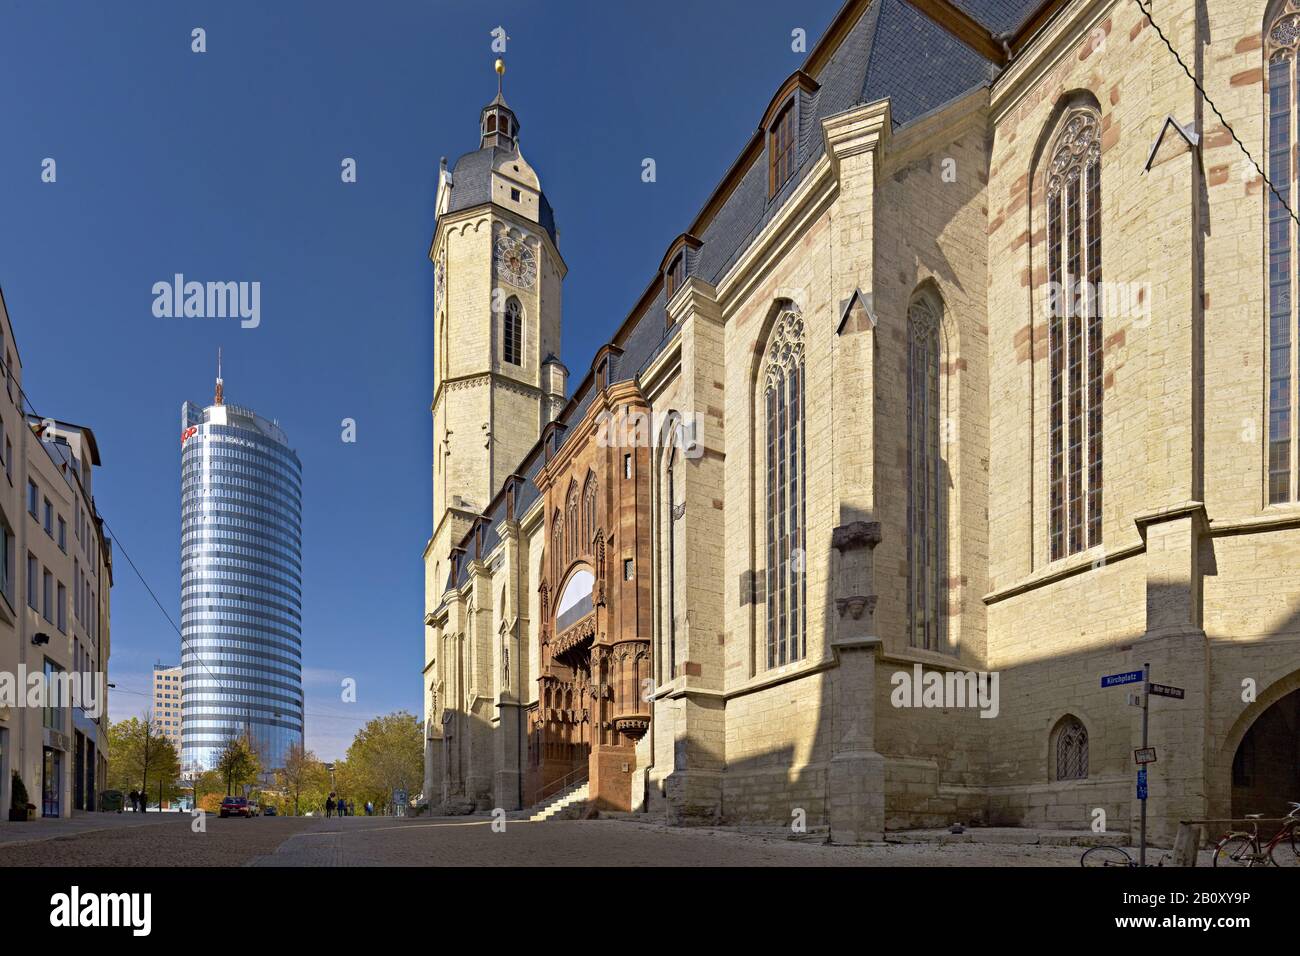 Church square with town church St. Michael and Jentower in Jena, Thuringia, Germany, Stock Photo